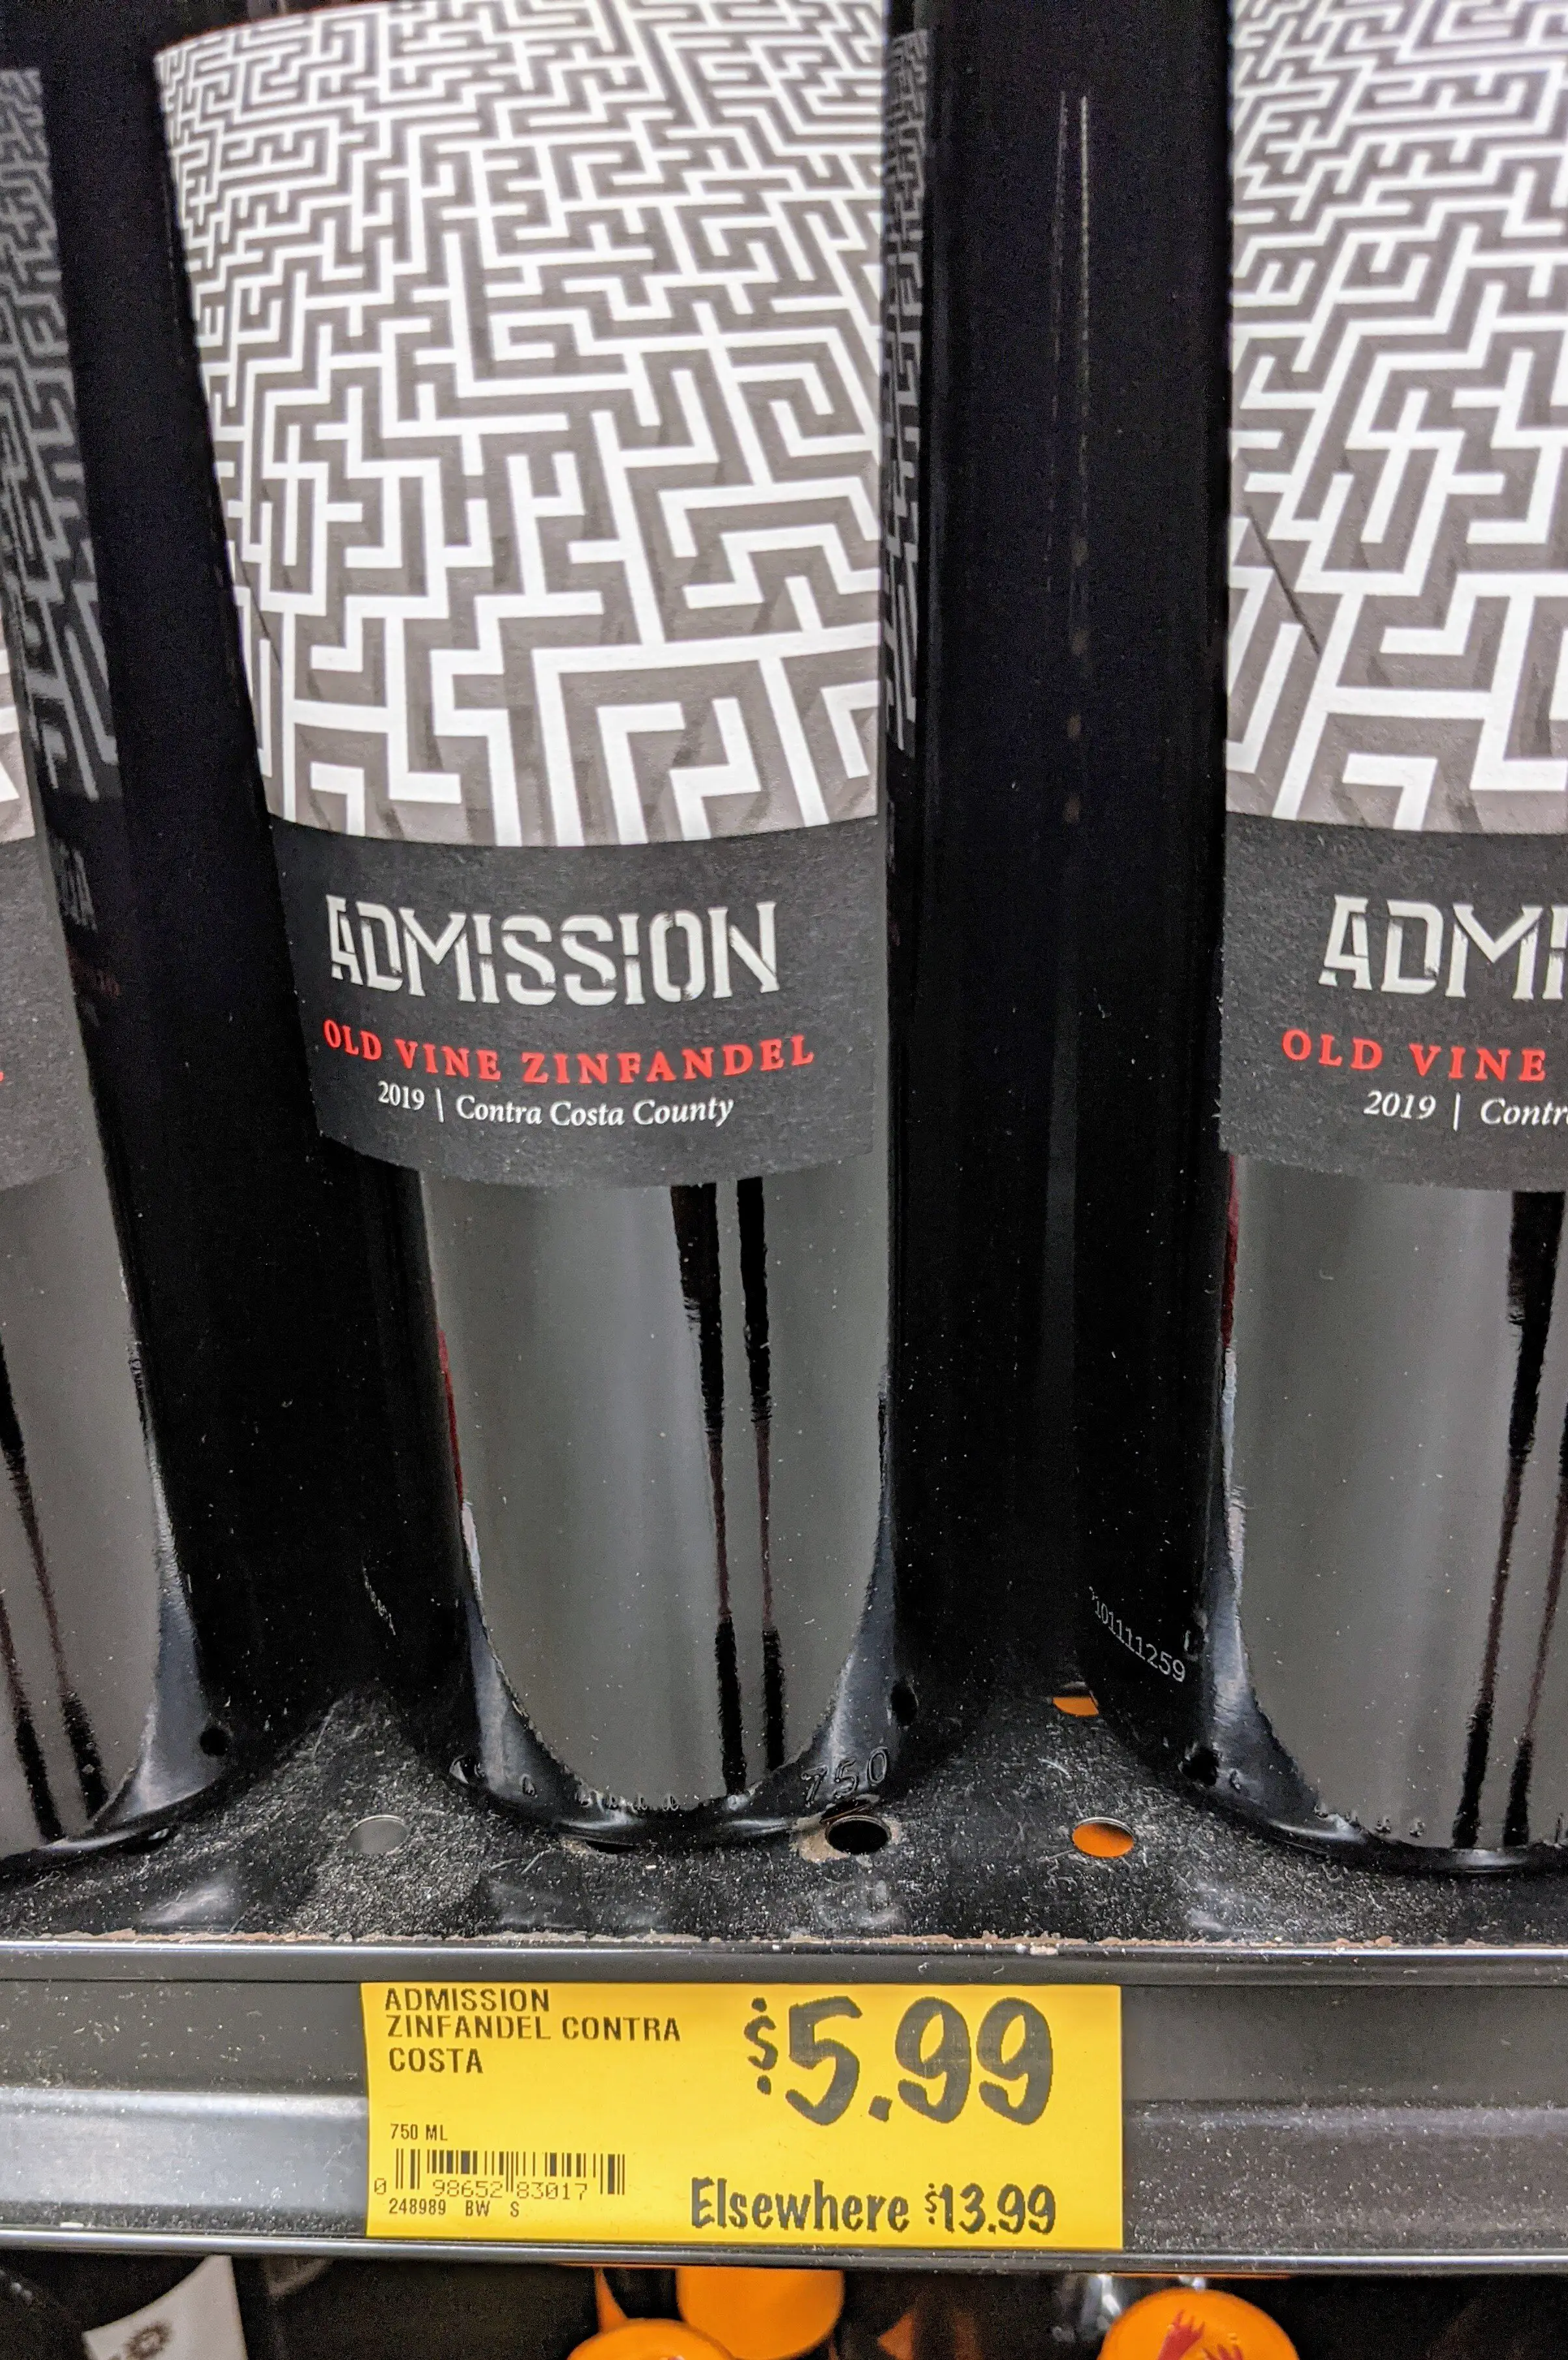 how to read a wine label - old vine zinfandel